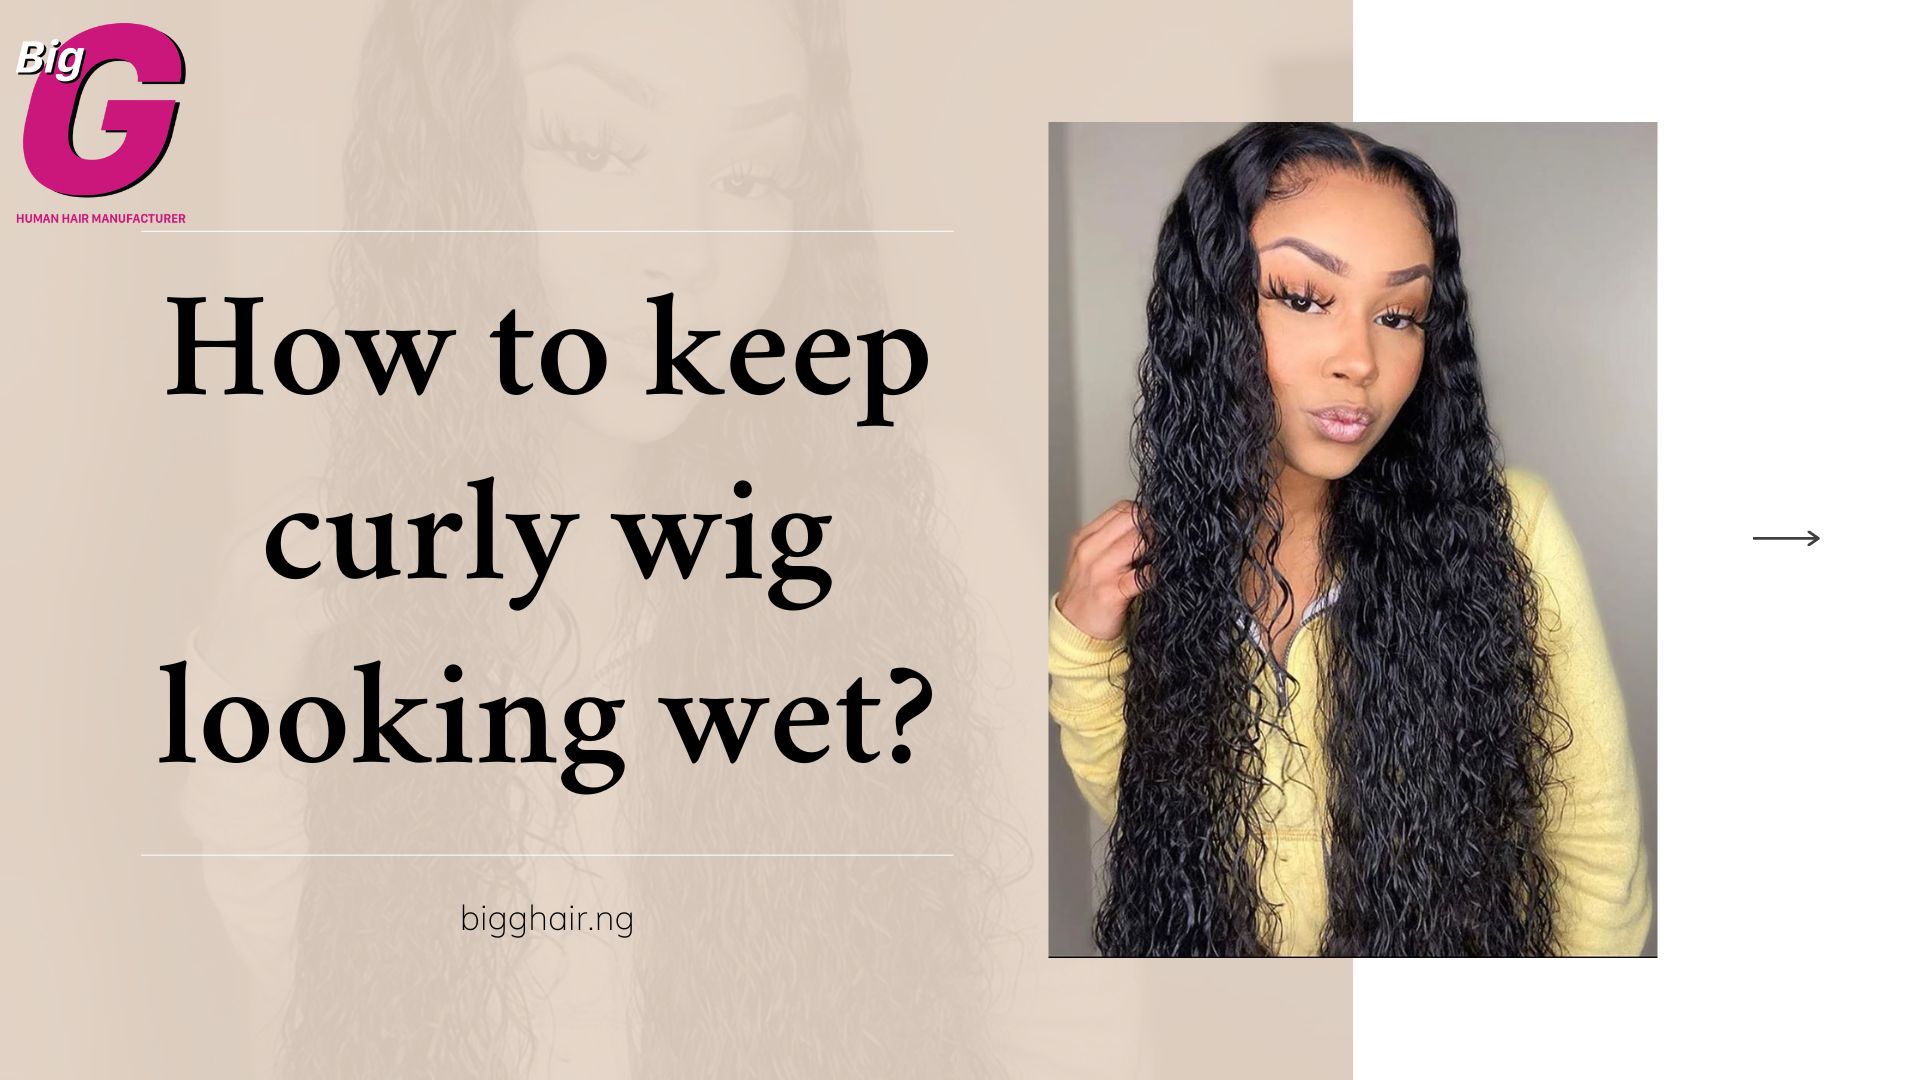 How to keep curly wig looking wet easily in 7 steps?